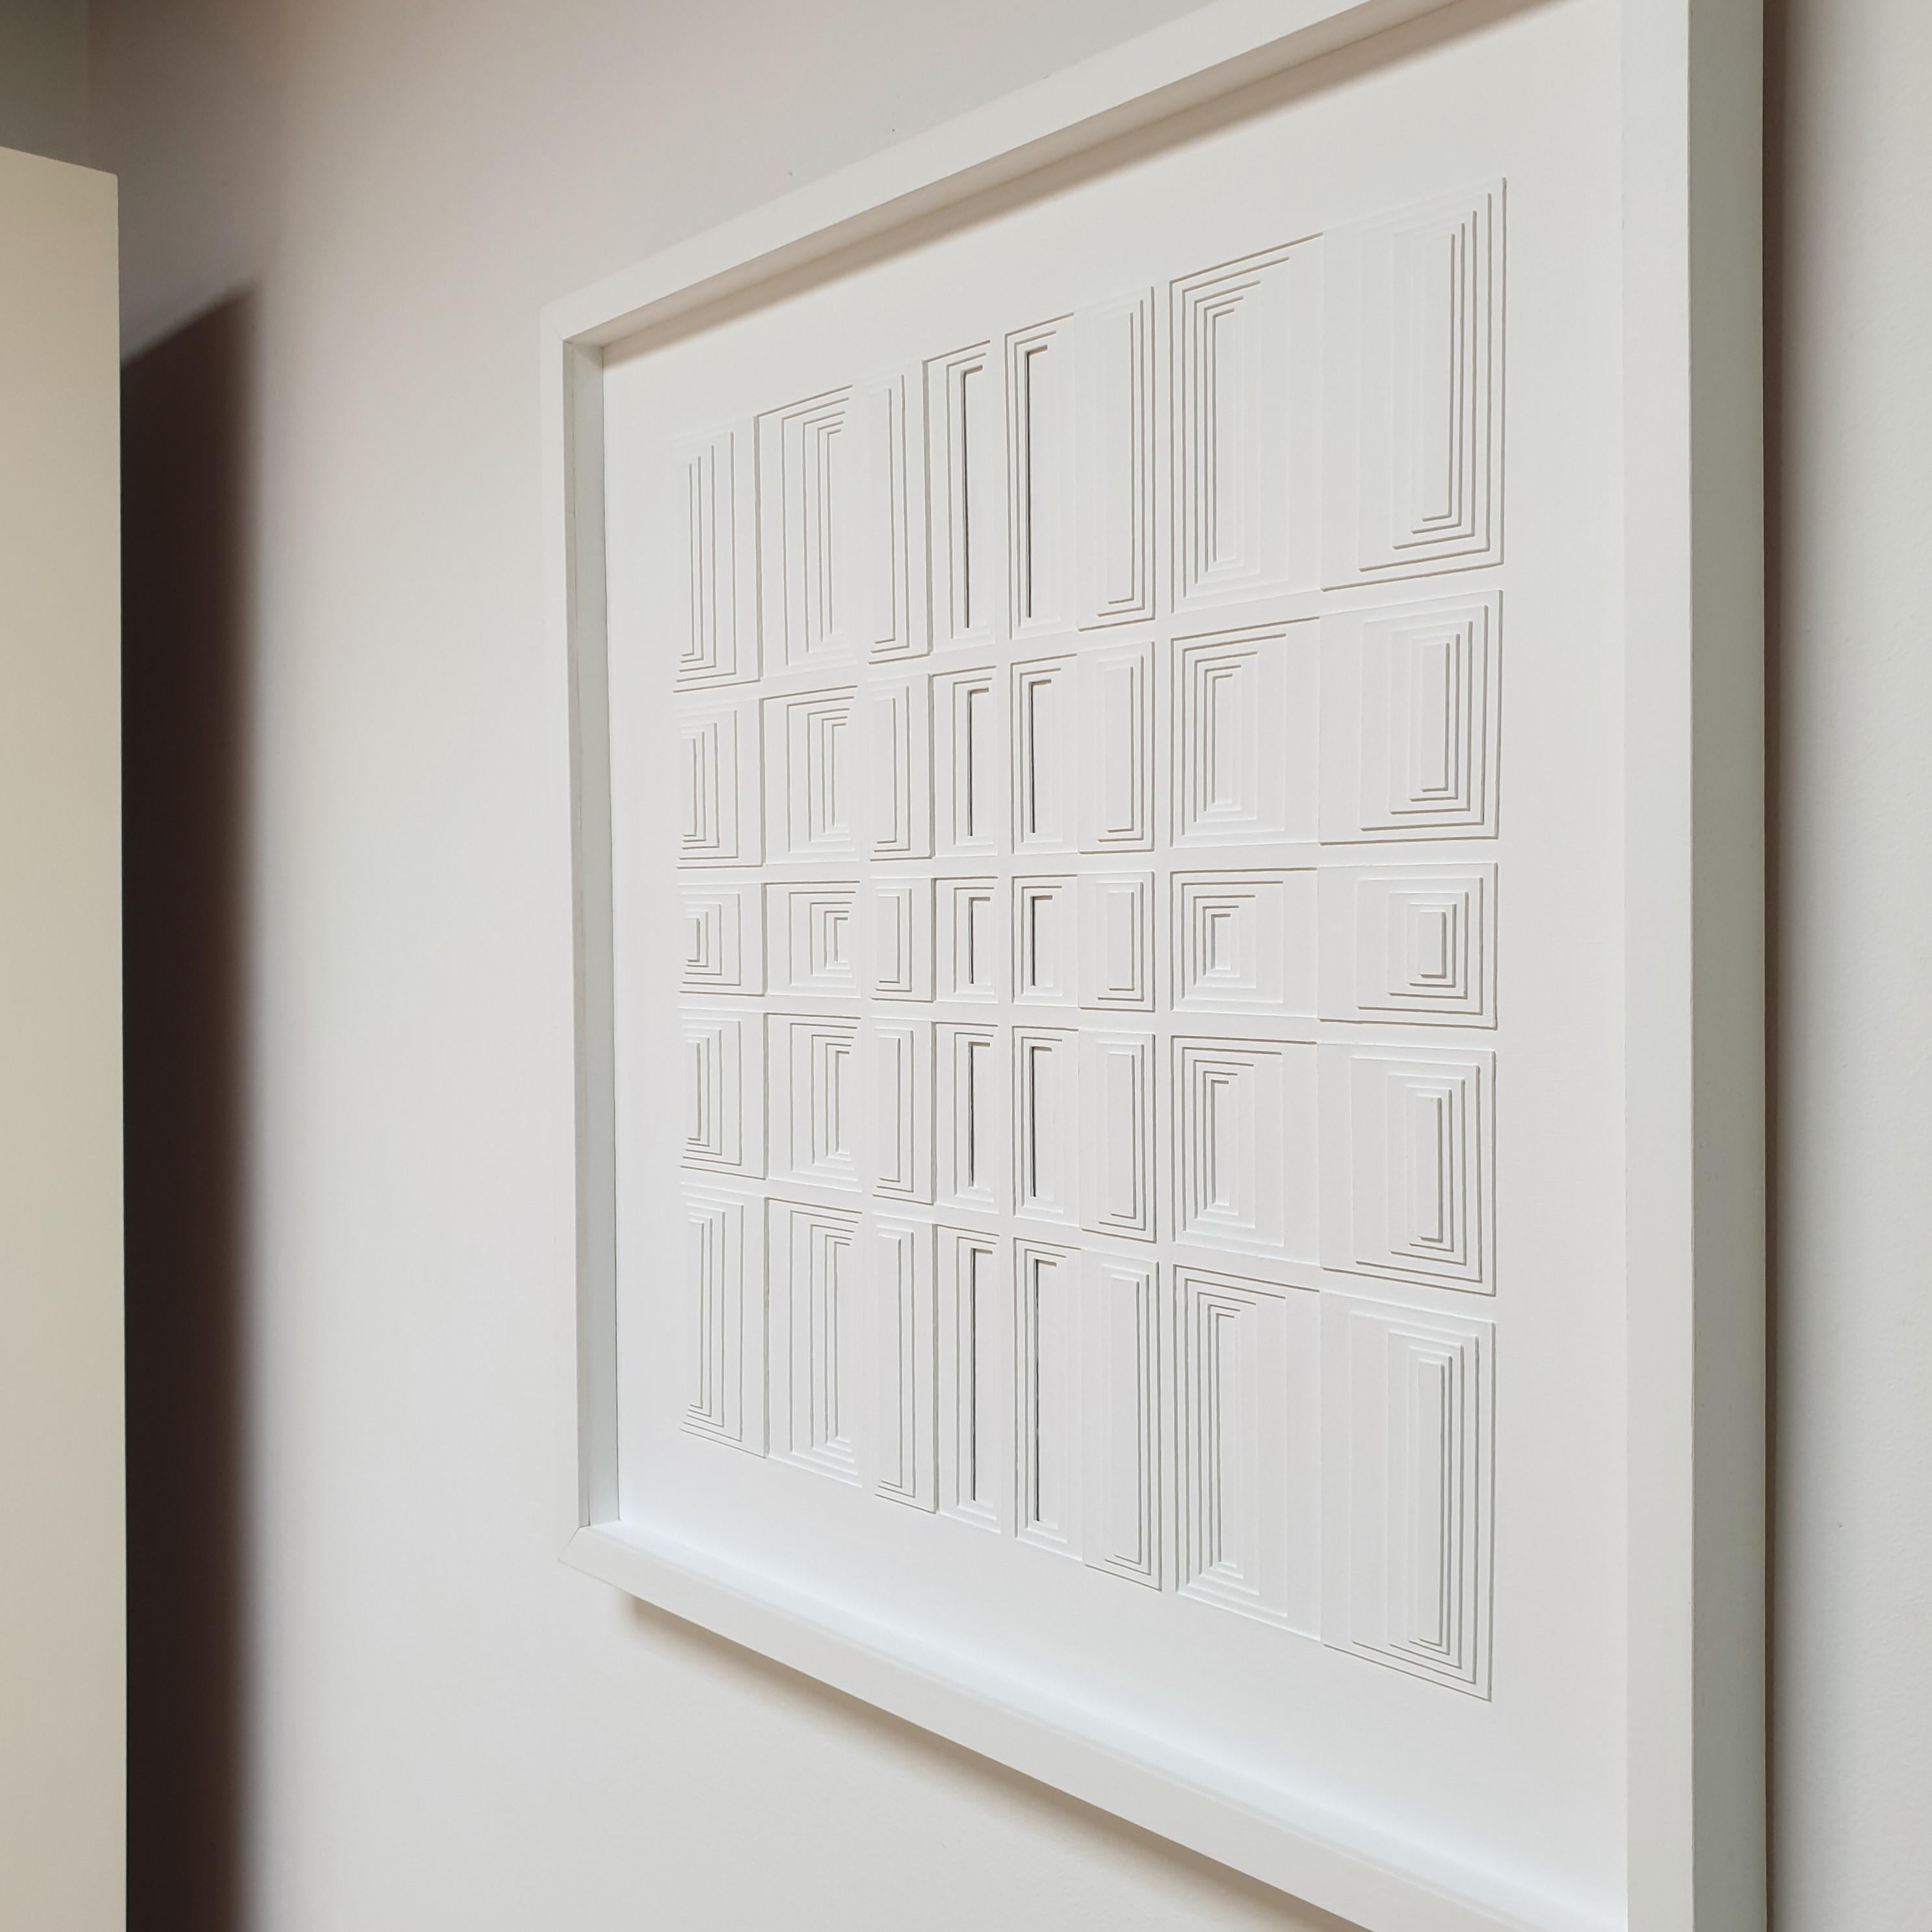 BB41222 is a unique one-of-a-kind contemporary modern painting relief by Dutch artist Eef de Graaf. The relief is made from meticulously hand cut cardboard elements finished with a matt white acrylic paint. This art work is mounted in a simple white